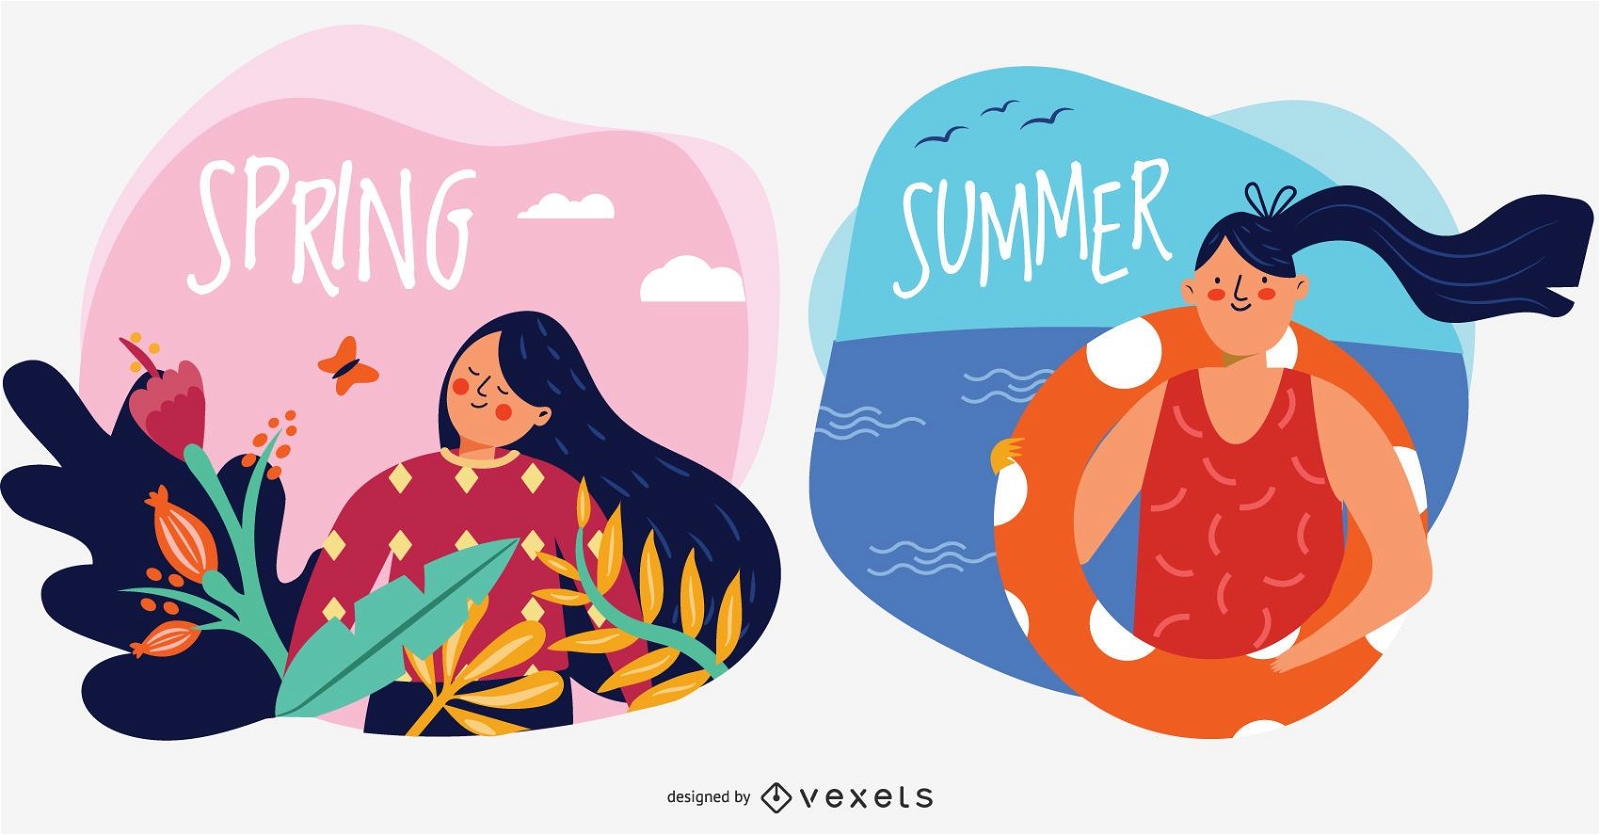 Spring and Summer Character Vector Illustrations